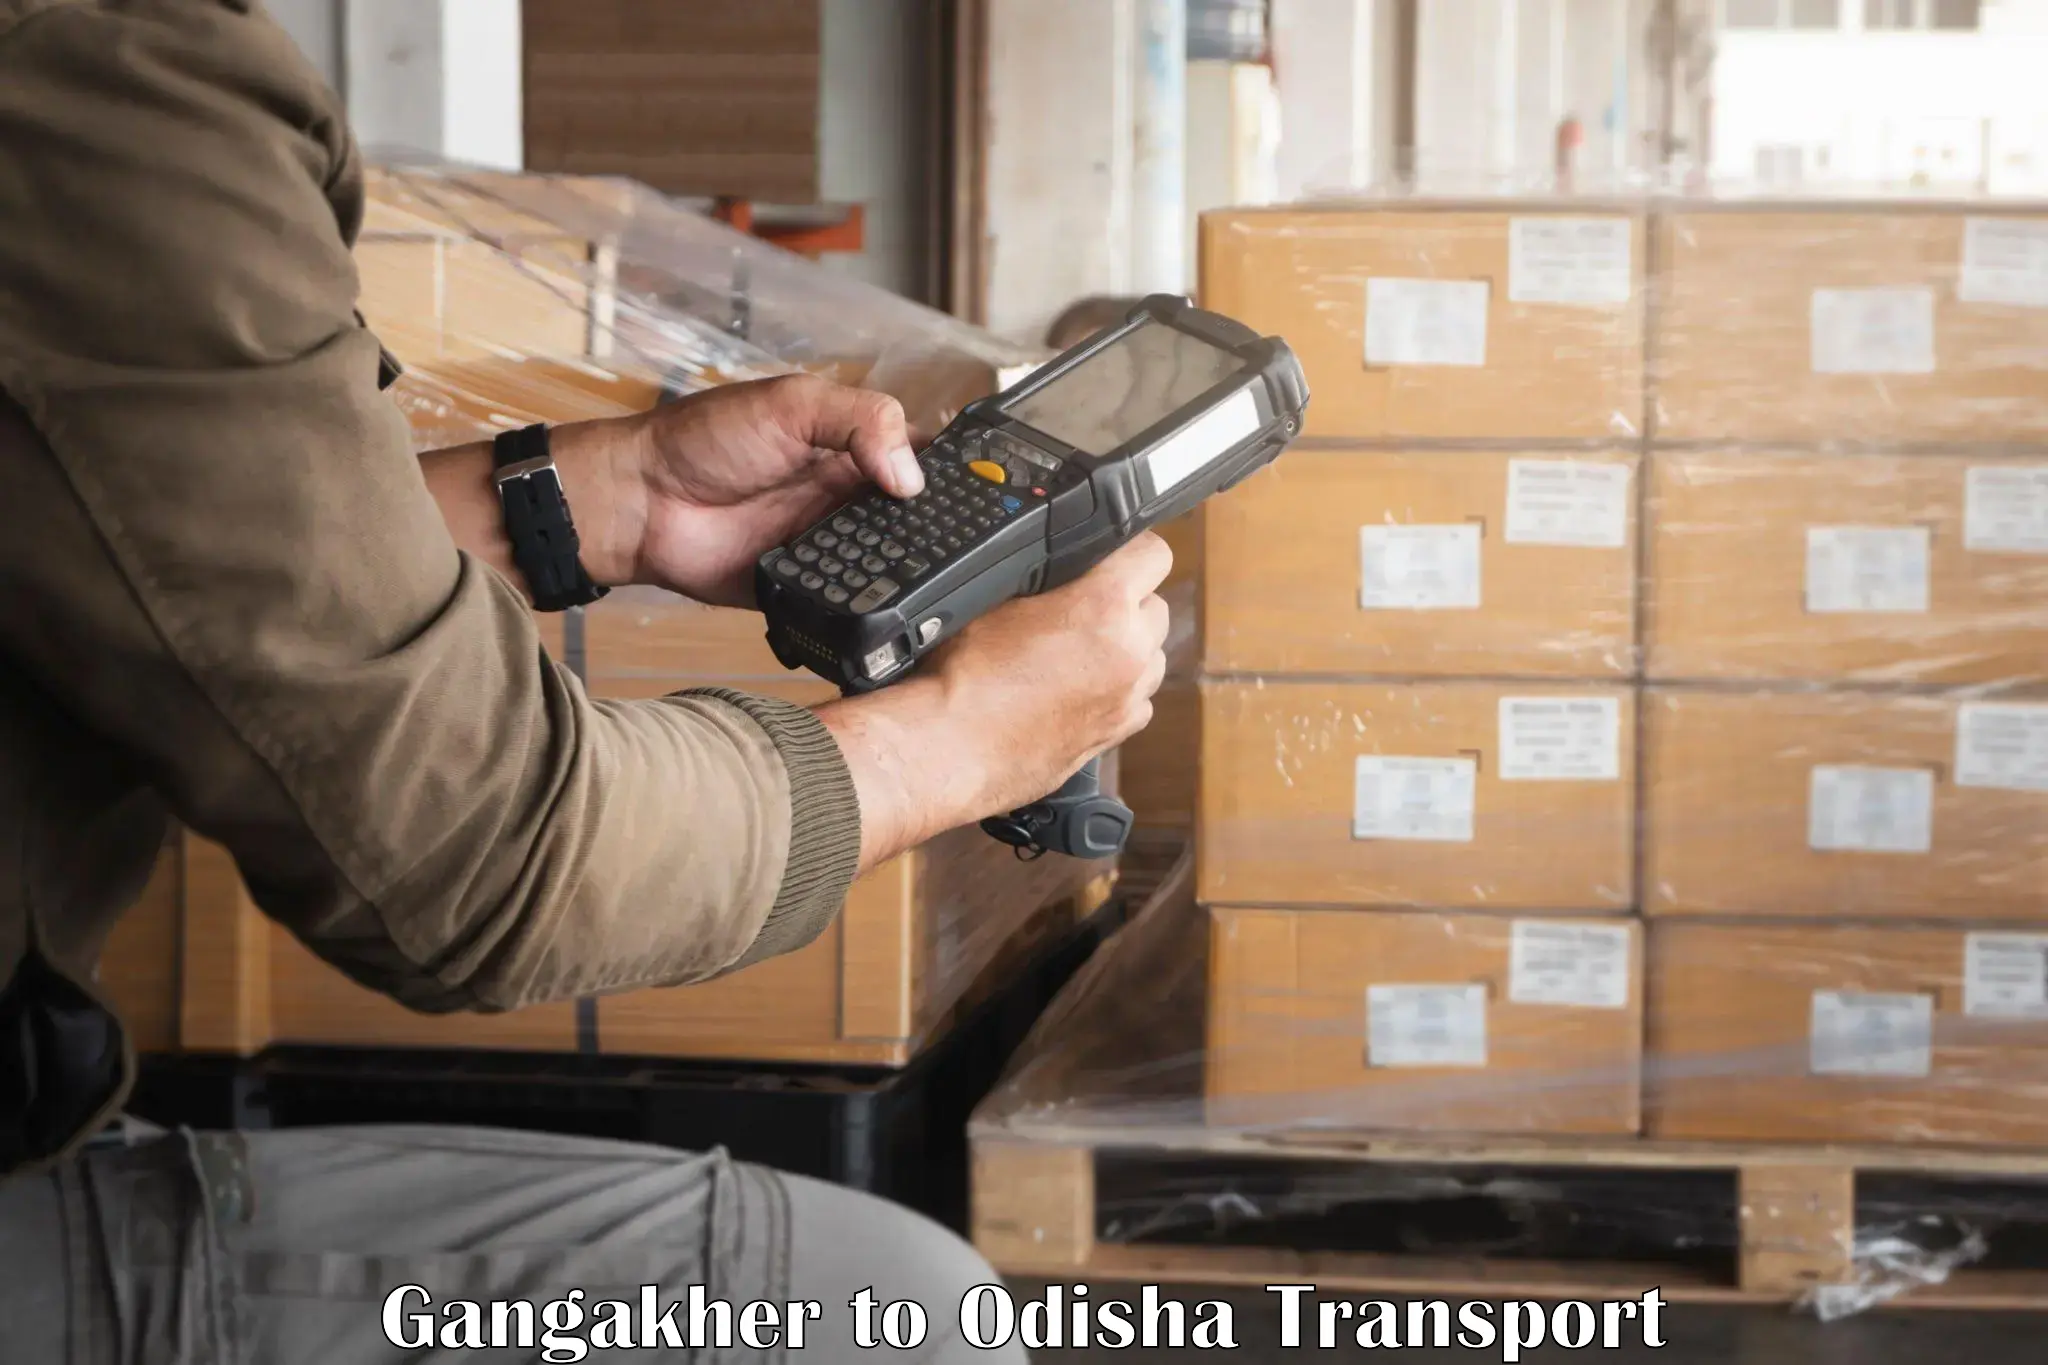 Air cargo transport services Gangakher to Chandipur